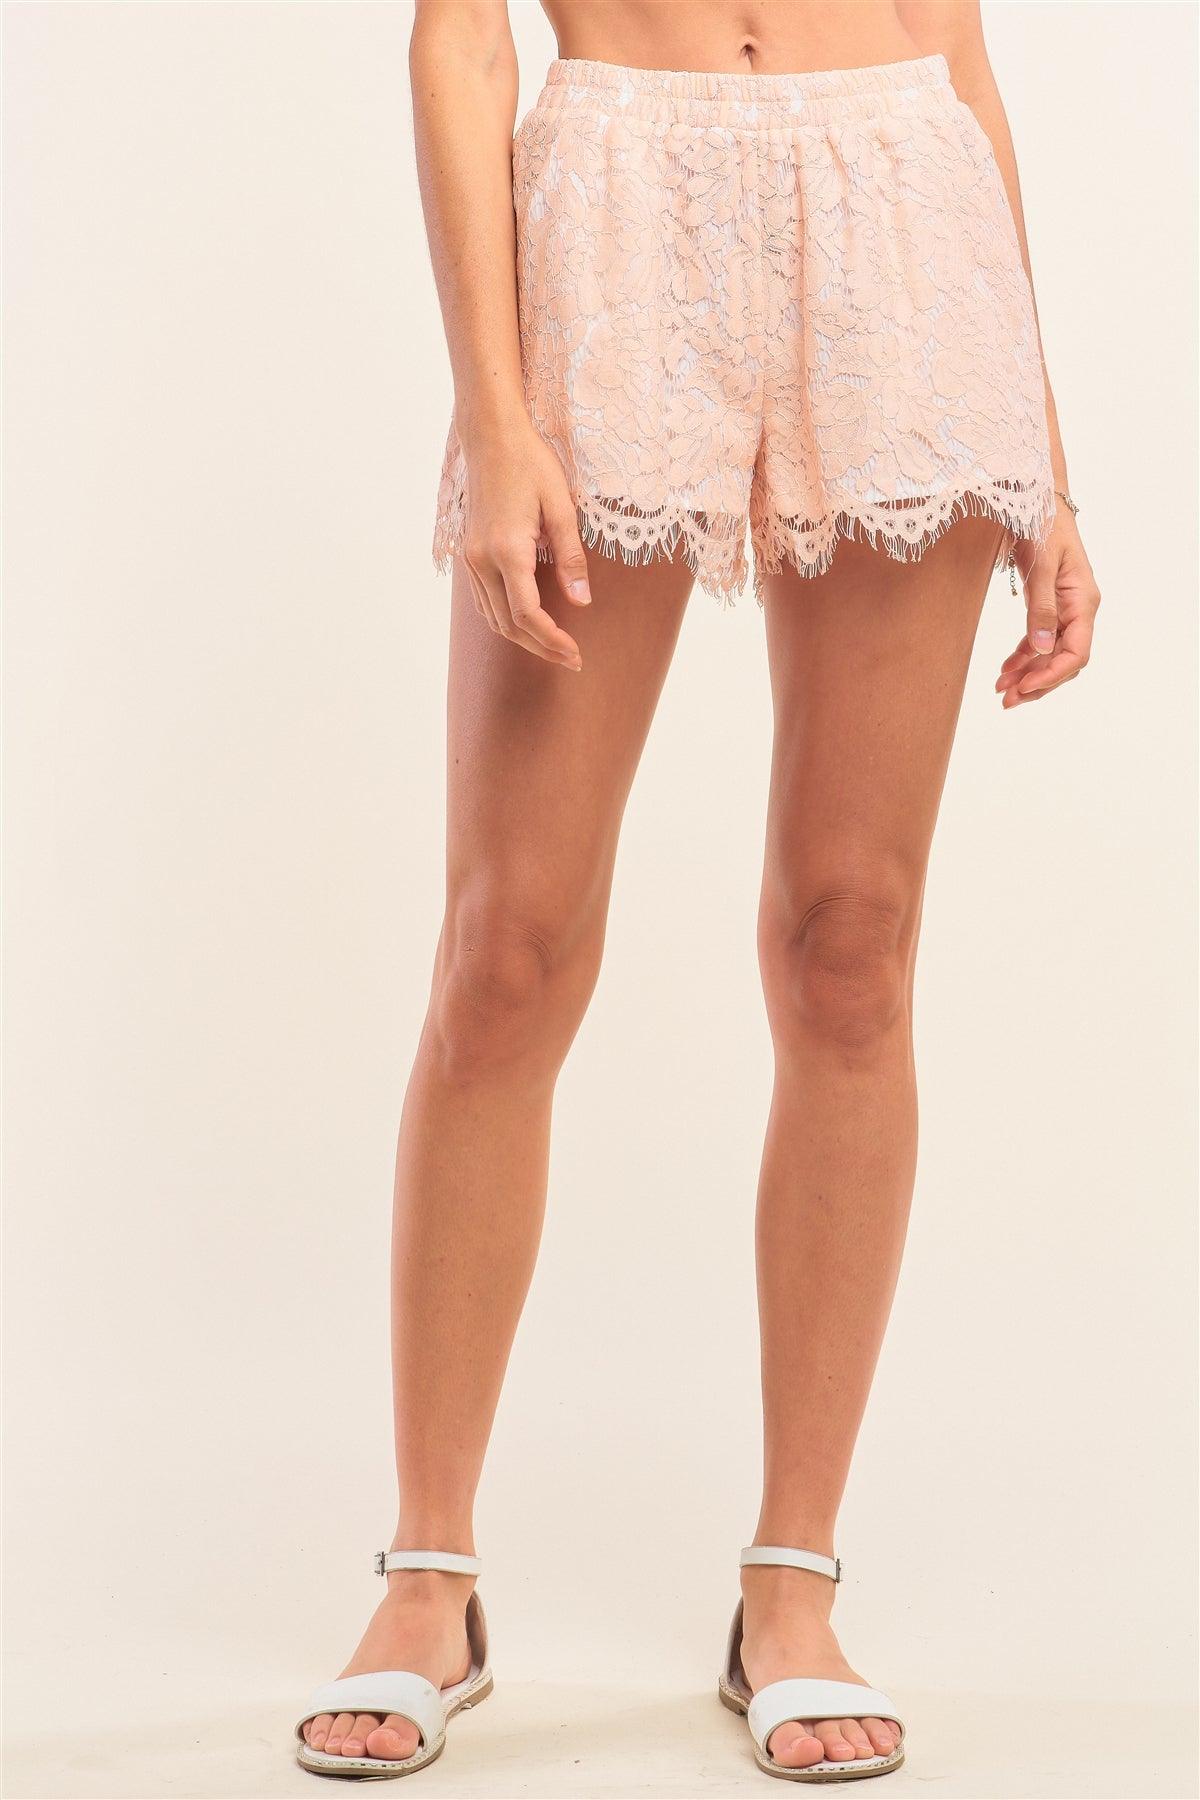 Blush Crochet Boho High Waist Lined Mini Shorts With Two Front Pockets /1-2-2-1